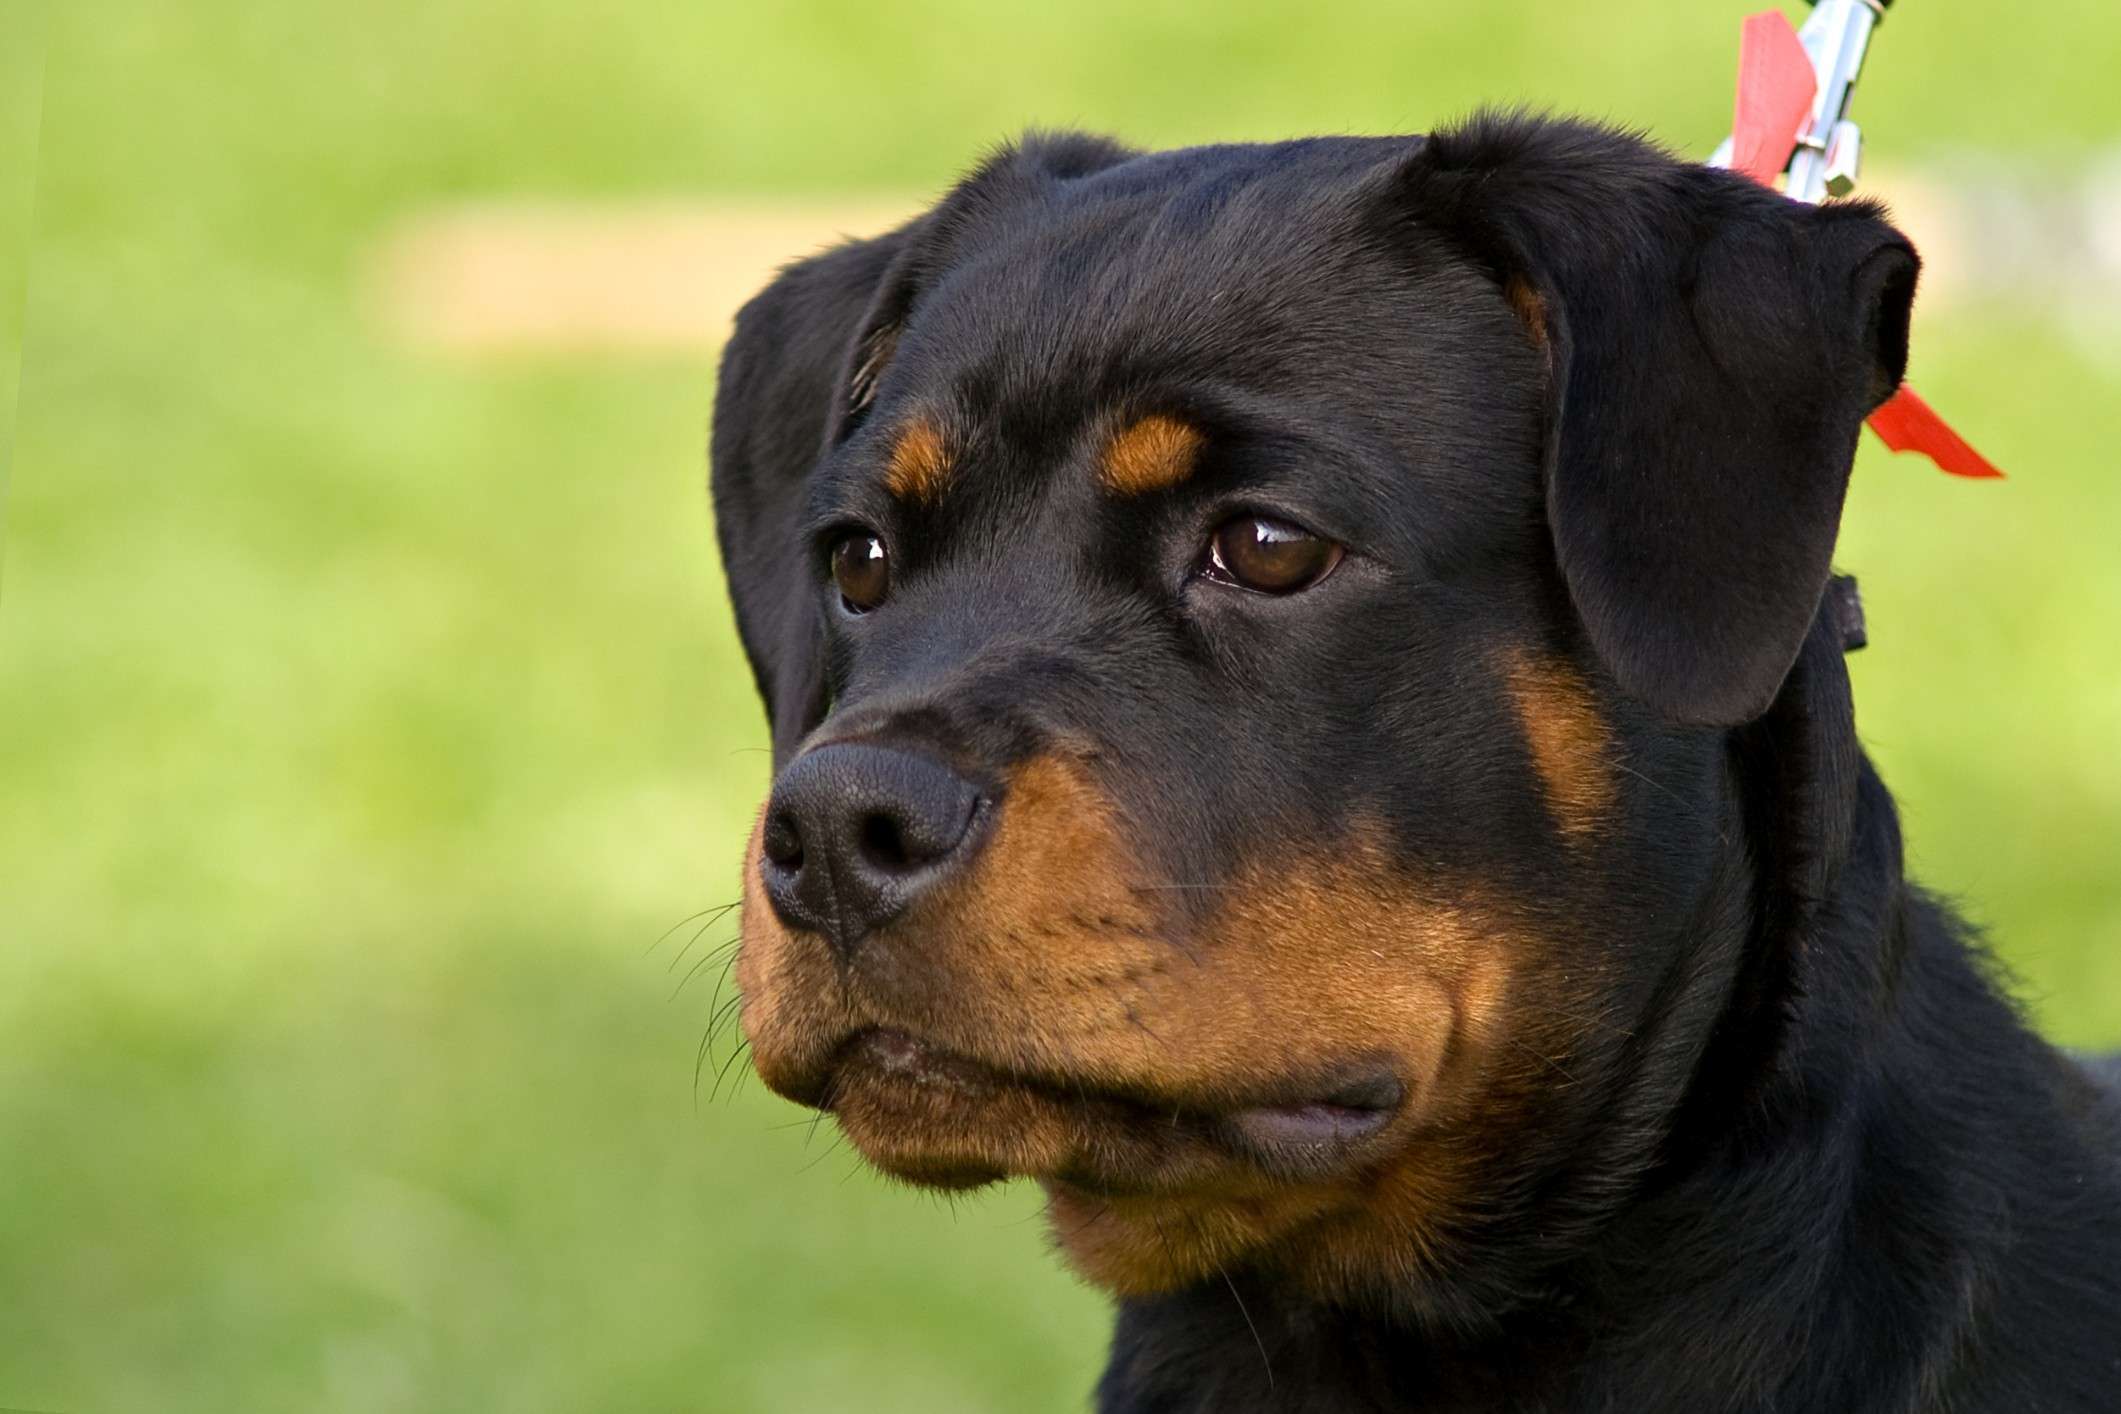 About Rottweilers